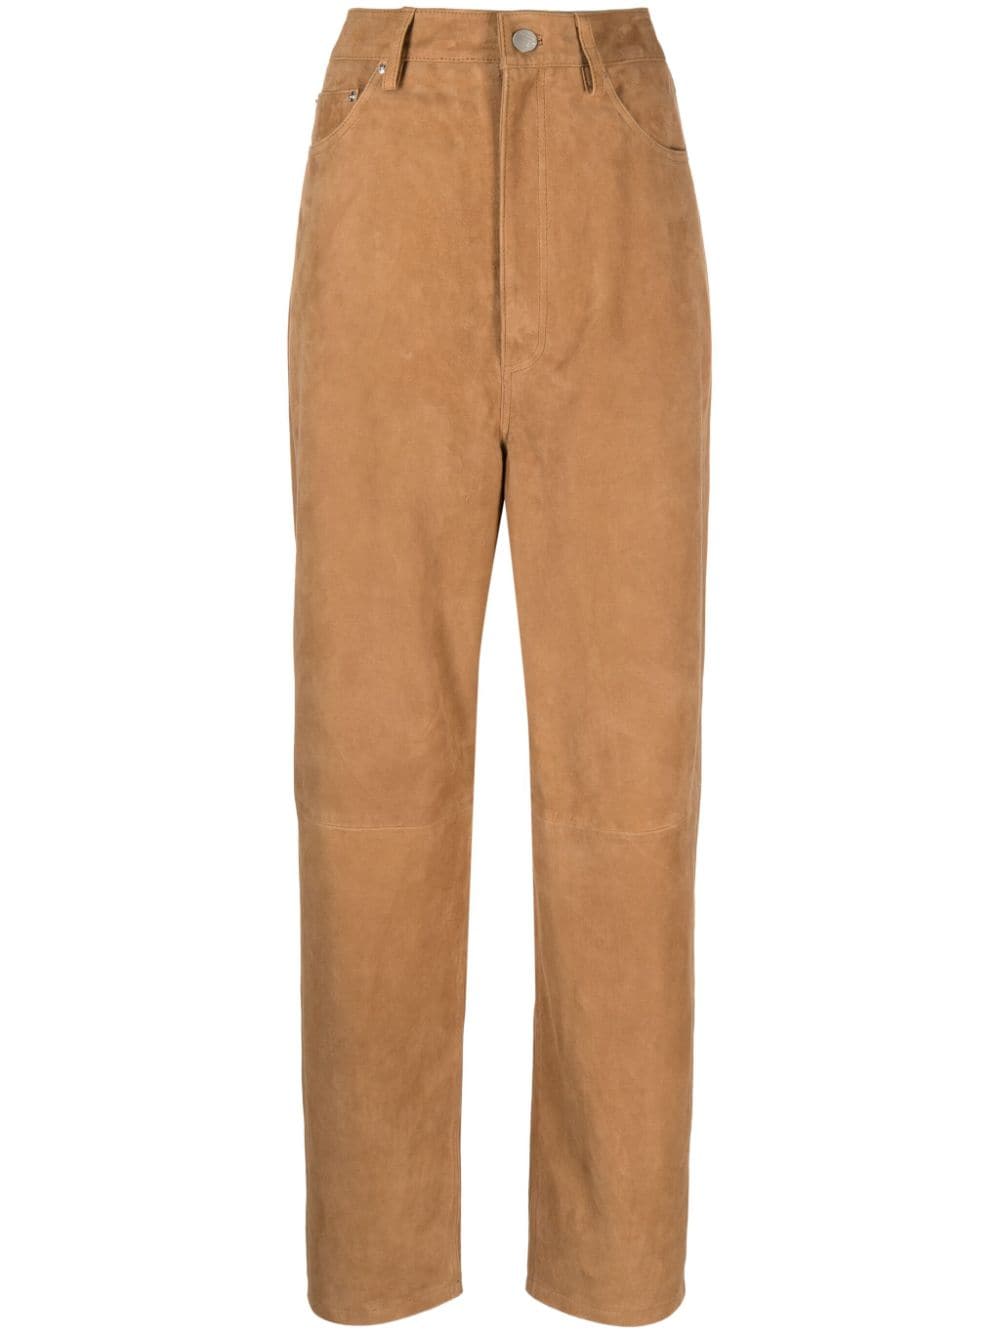 bonded-seamed suede cocoon trousers